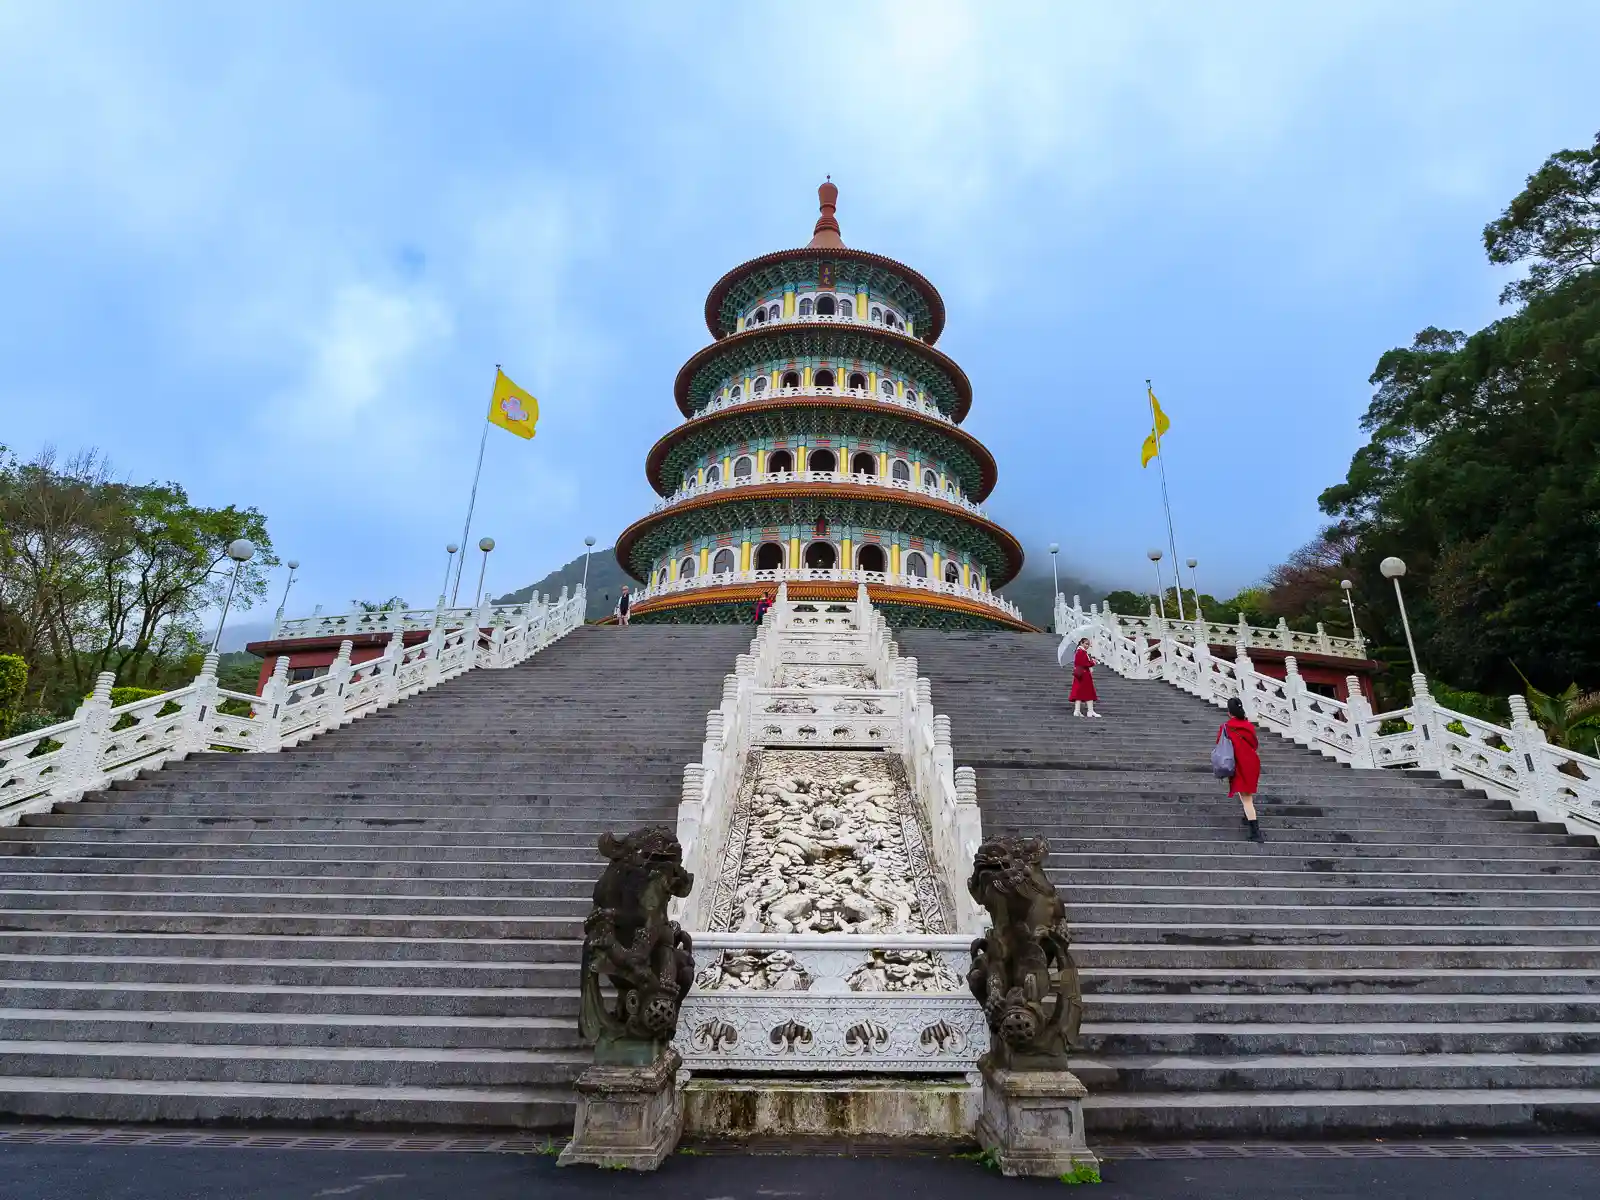 Two wide sets of stairs lead up to the Tiantan, before them, stand two stone statues.